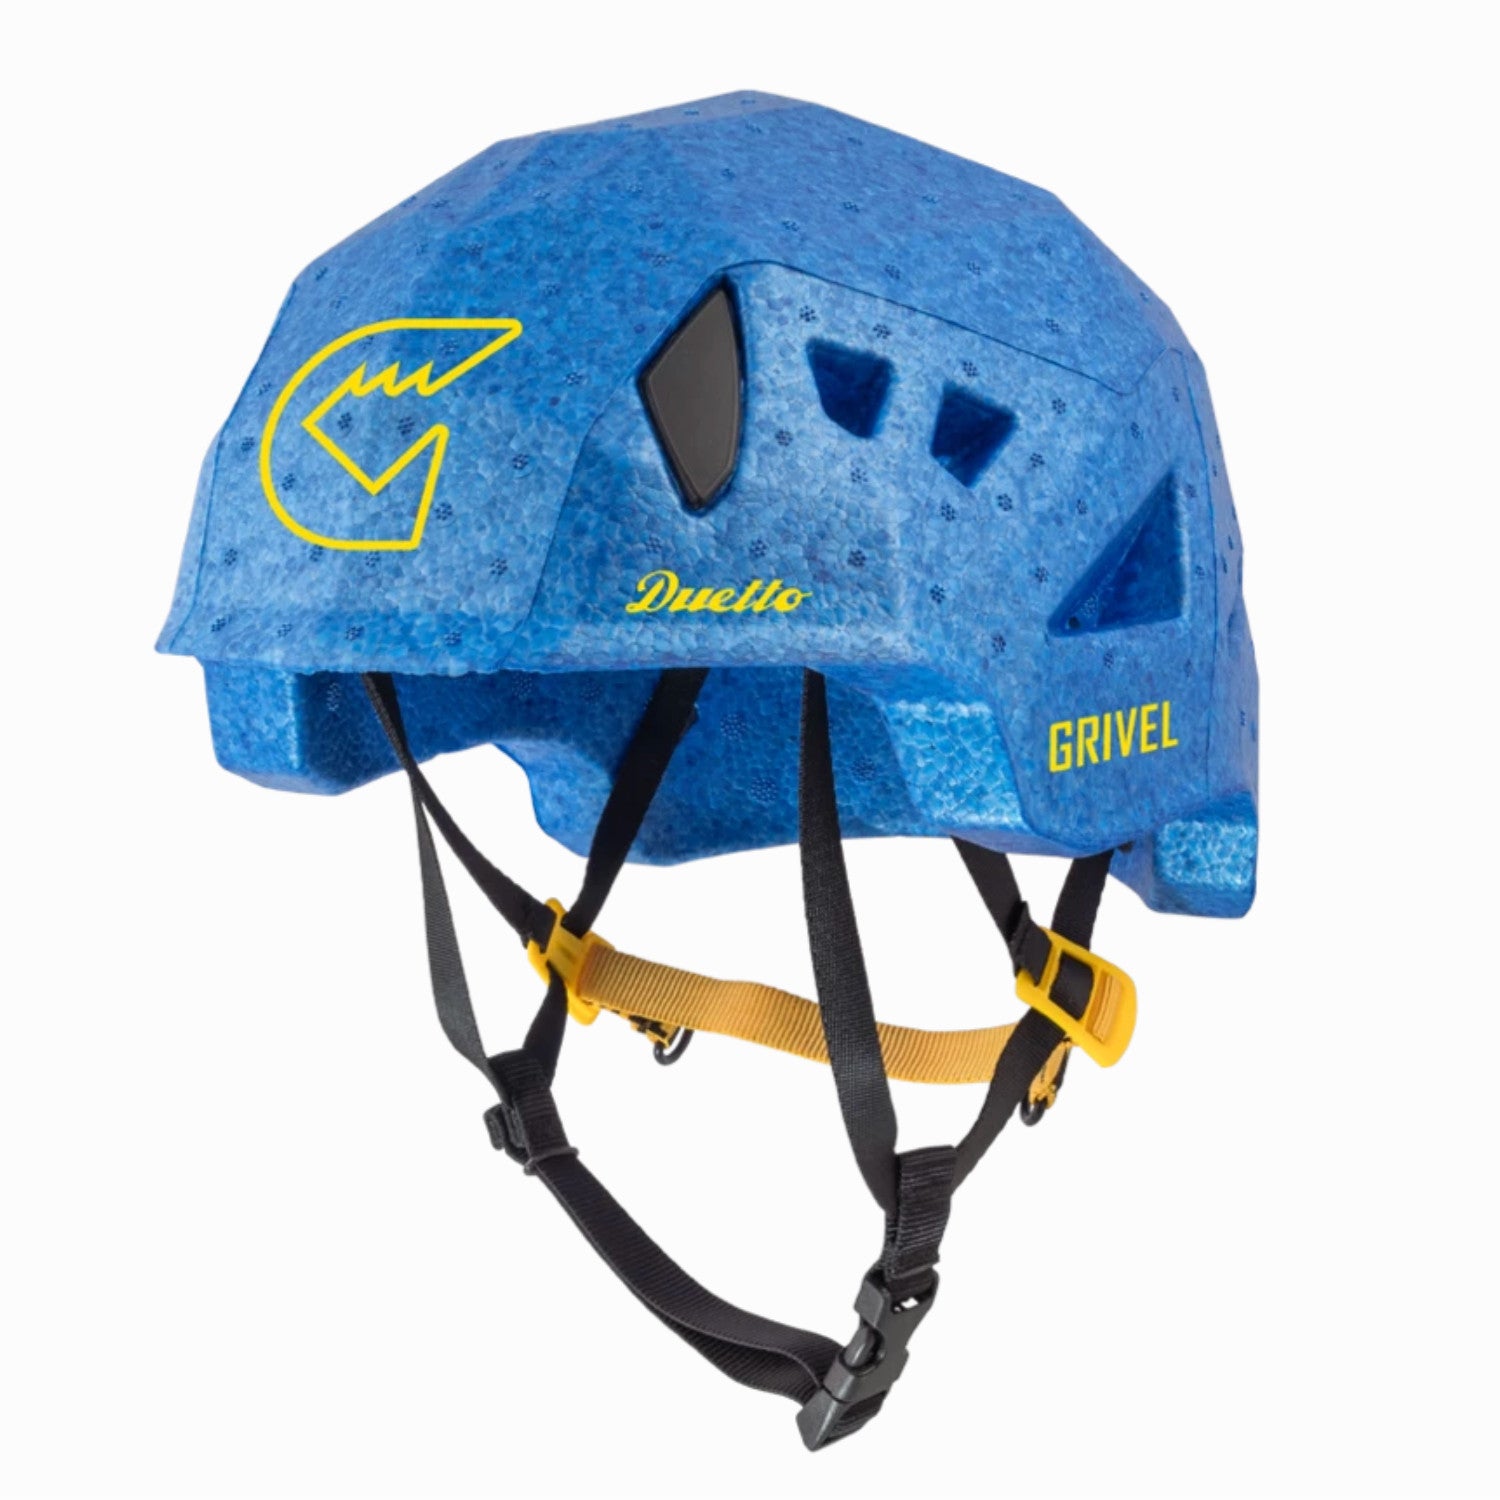 Grivel Duetto climbing and skiing helmet, front/side view in Blue colour